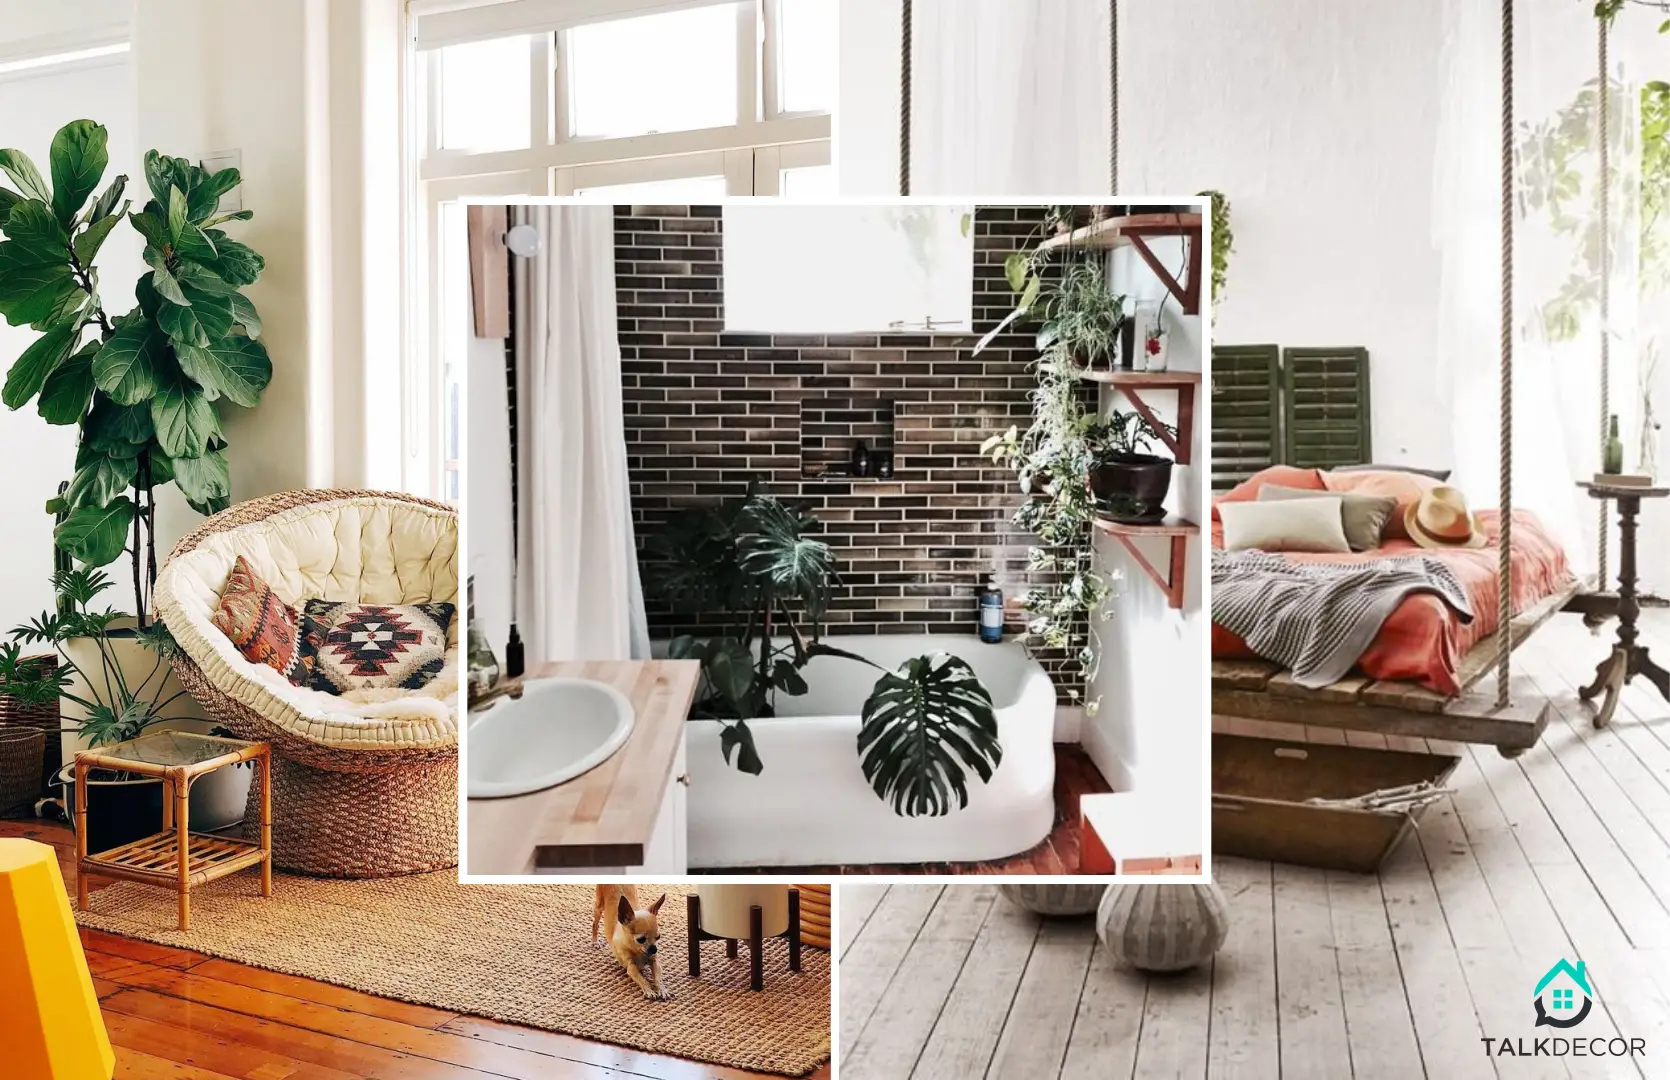 Freshen Up Your Tired House with These 4 Boho-Style Interior Design Ideas